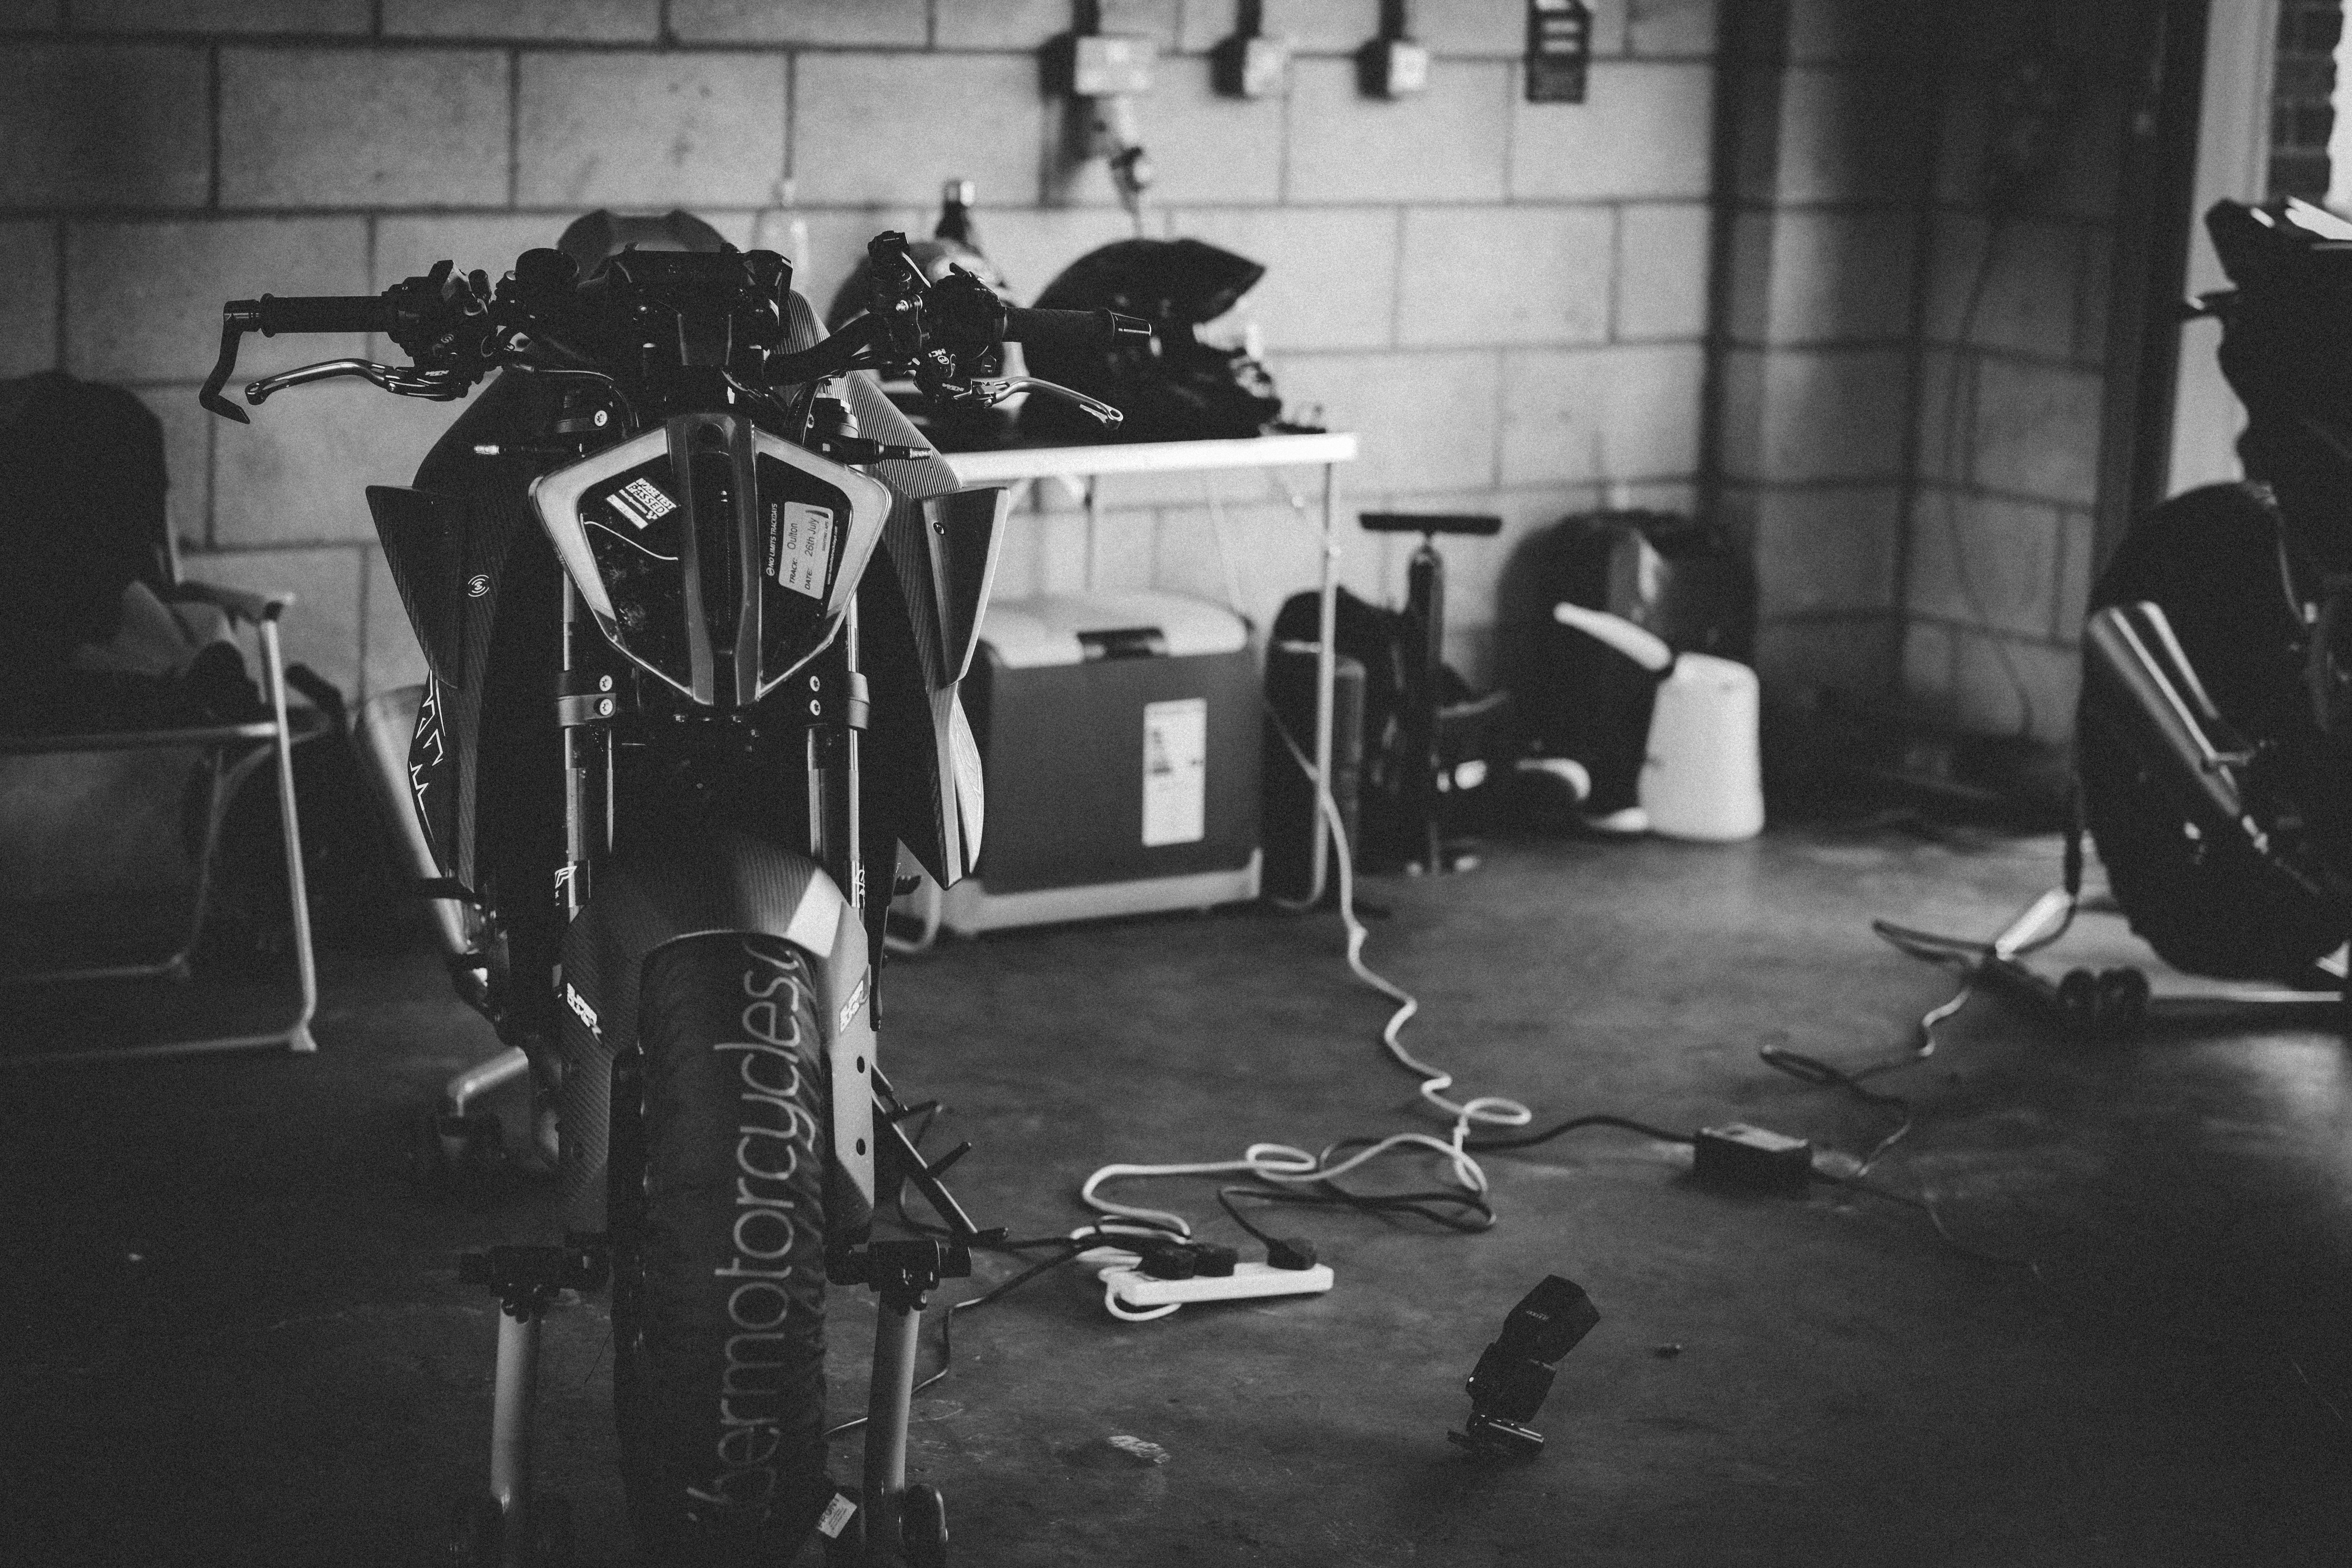 Motorbike KTM in the pits at Oulton Park, black and white